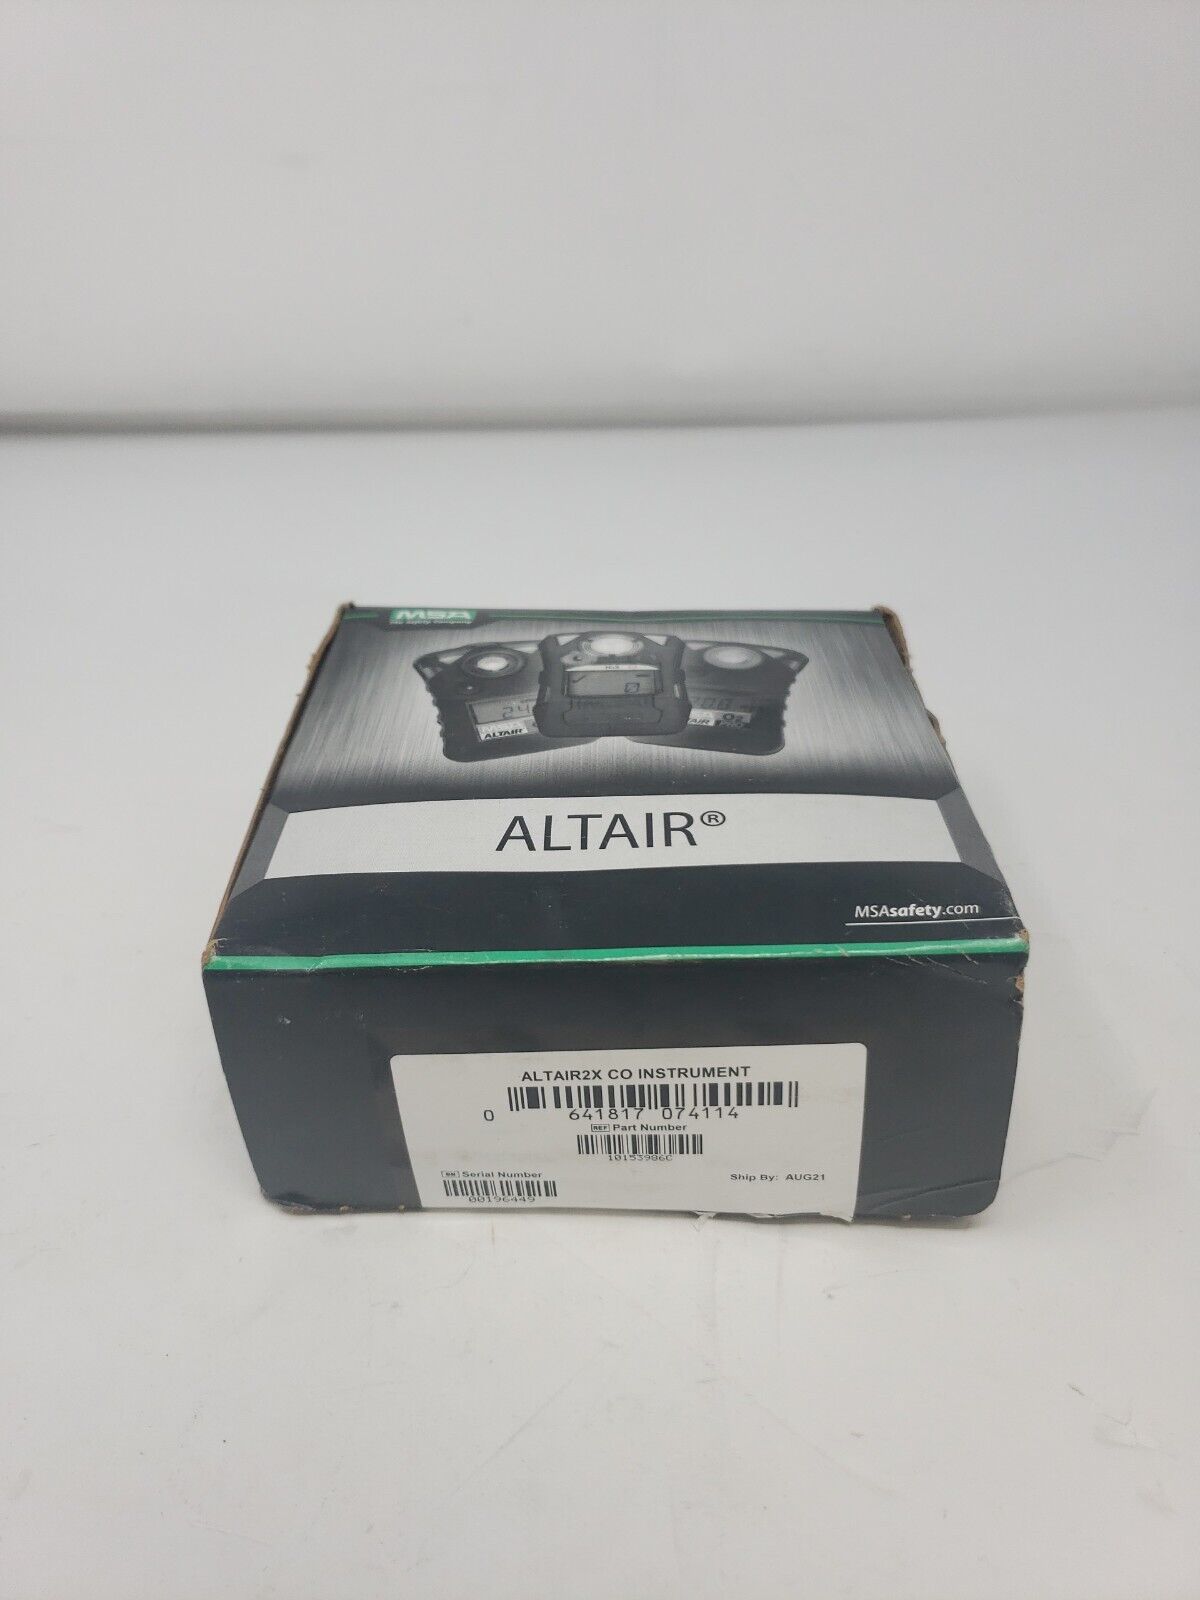 Altair2X Co Instrument CO Gas Detector